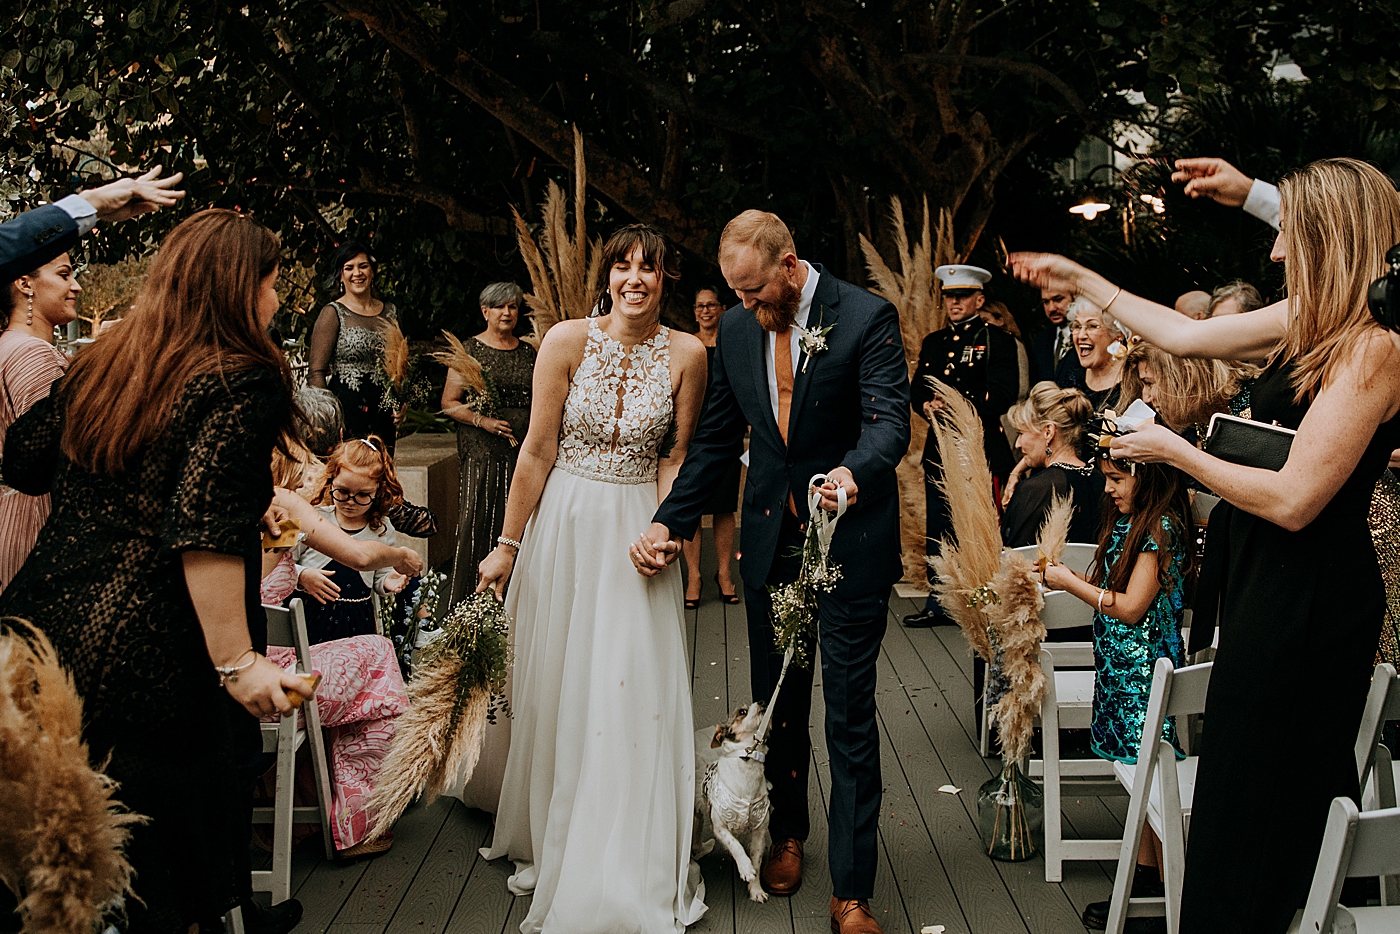 Bride and Groom leaving Ceremony with dog Historic Stranahan House Wedding Photography captured by South Florida Wedding Photographer Maggie Alvarez Photography